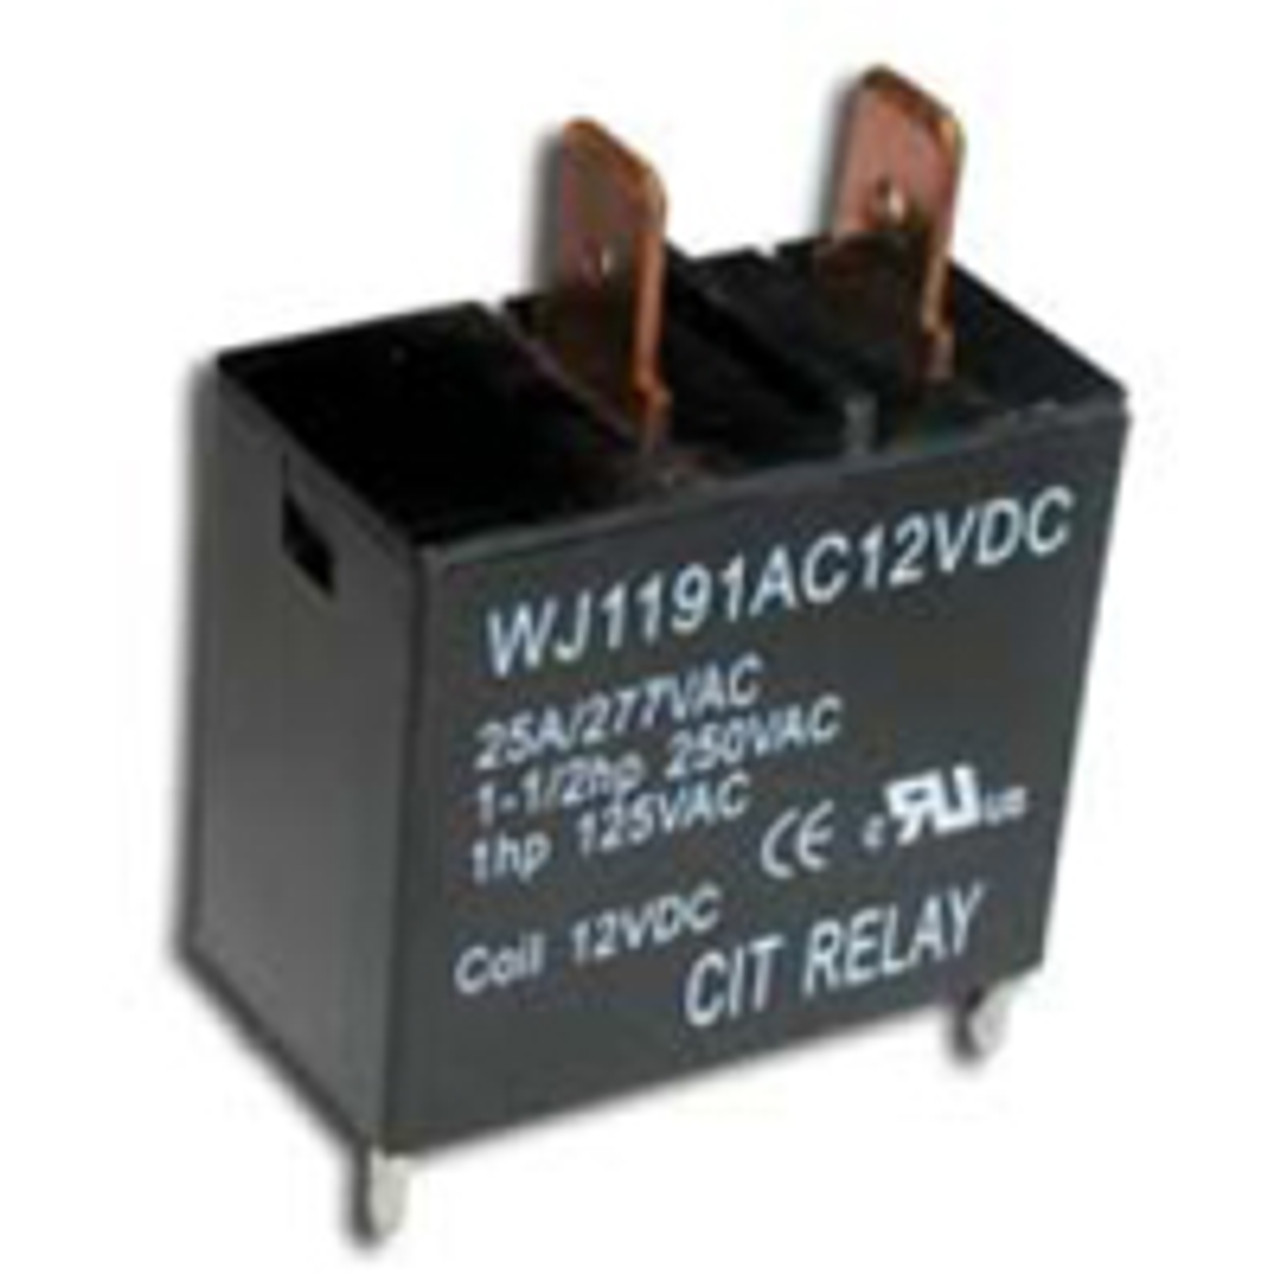 CIT Relay and Switch J1191AP9VDC Power Relays